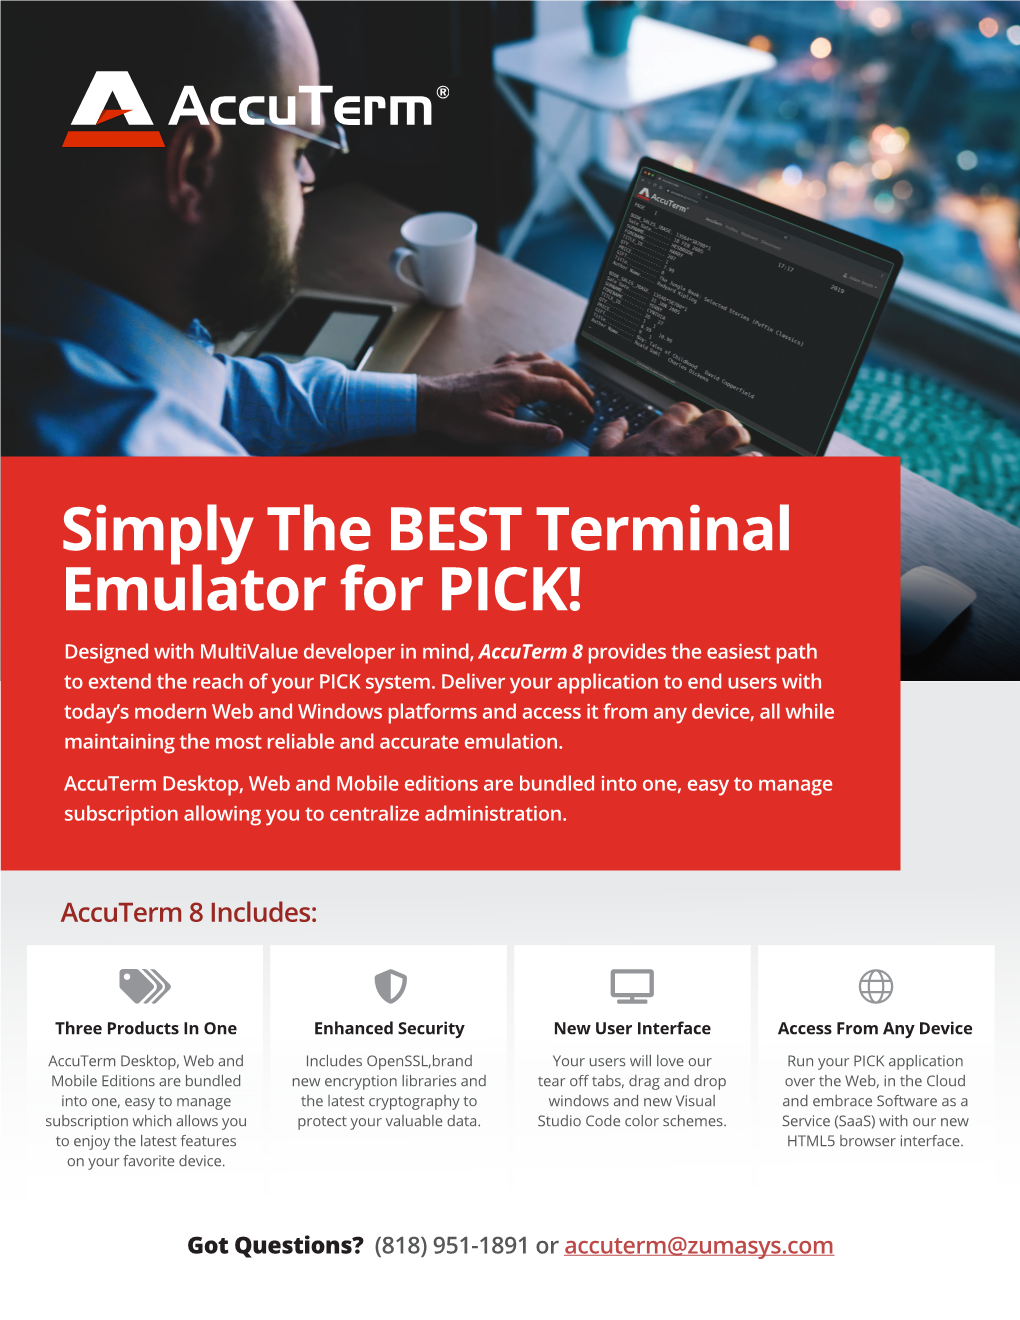 Simply the BEST Terminal Emulator for PICK! Designed with Multivalue Developer in Mind, Accuterm 8 Provides the Easiest Path to Extend the Reach of Your PICK System